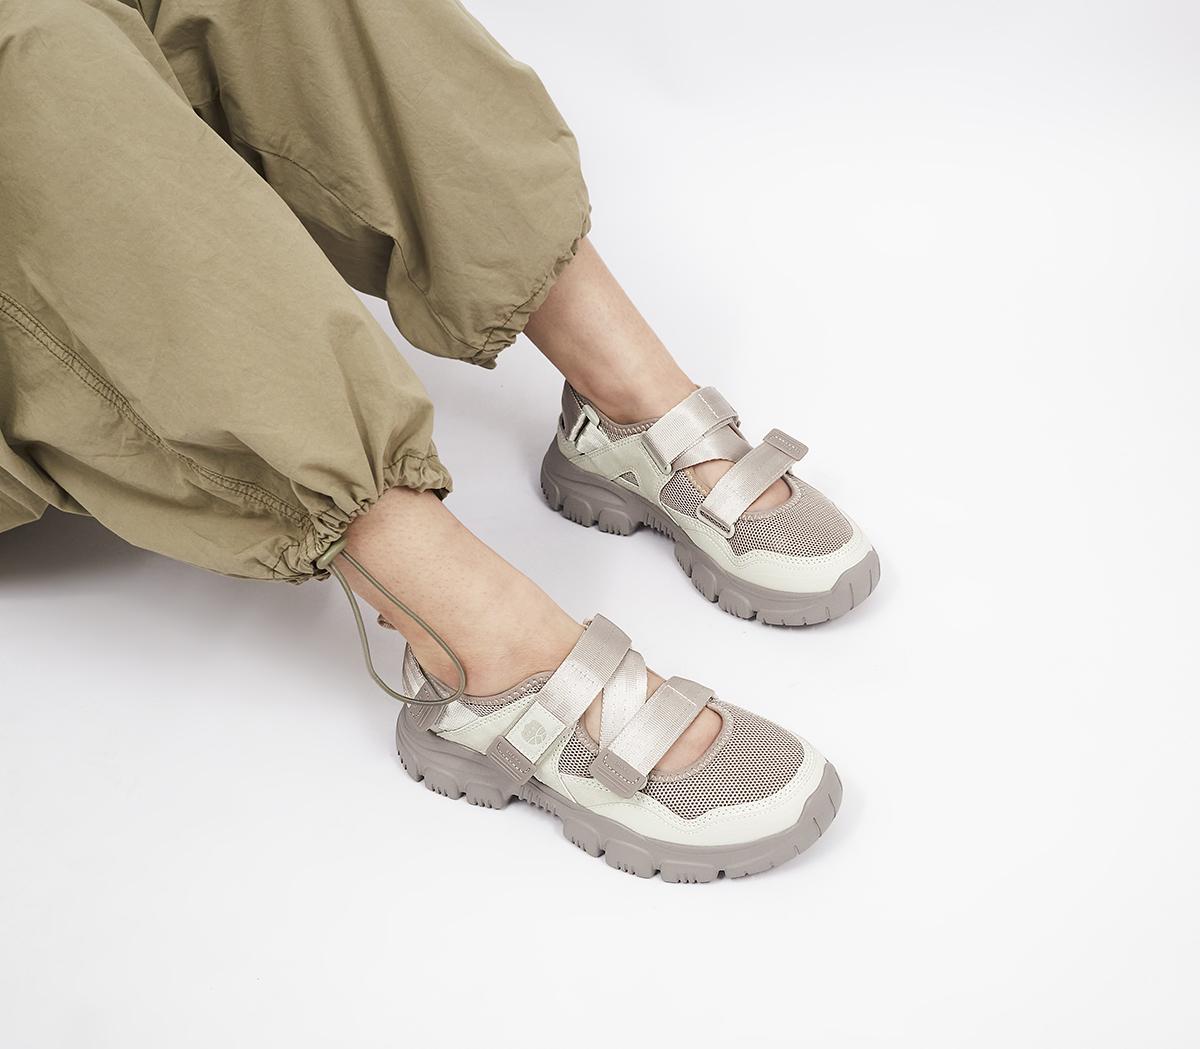 SHAKA Otter Trail At Linen Taupe - Flat Shoes for Women